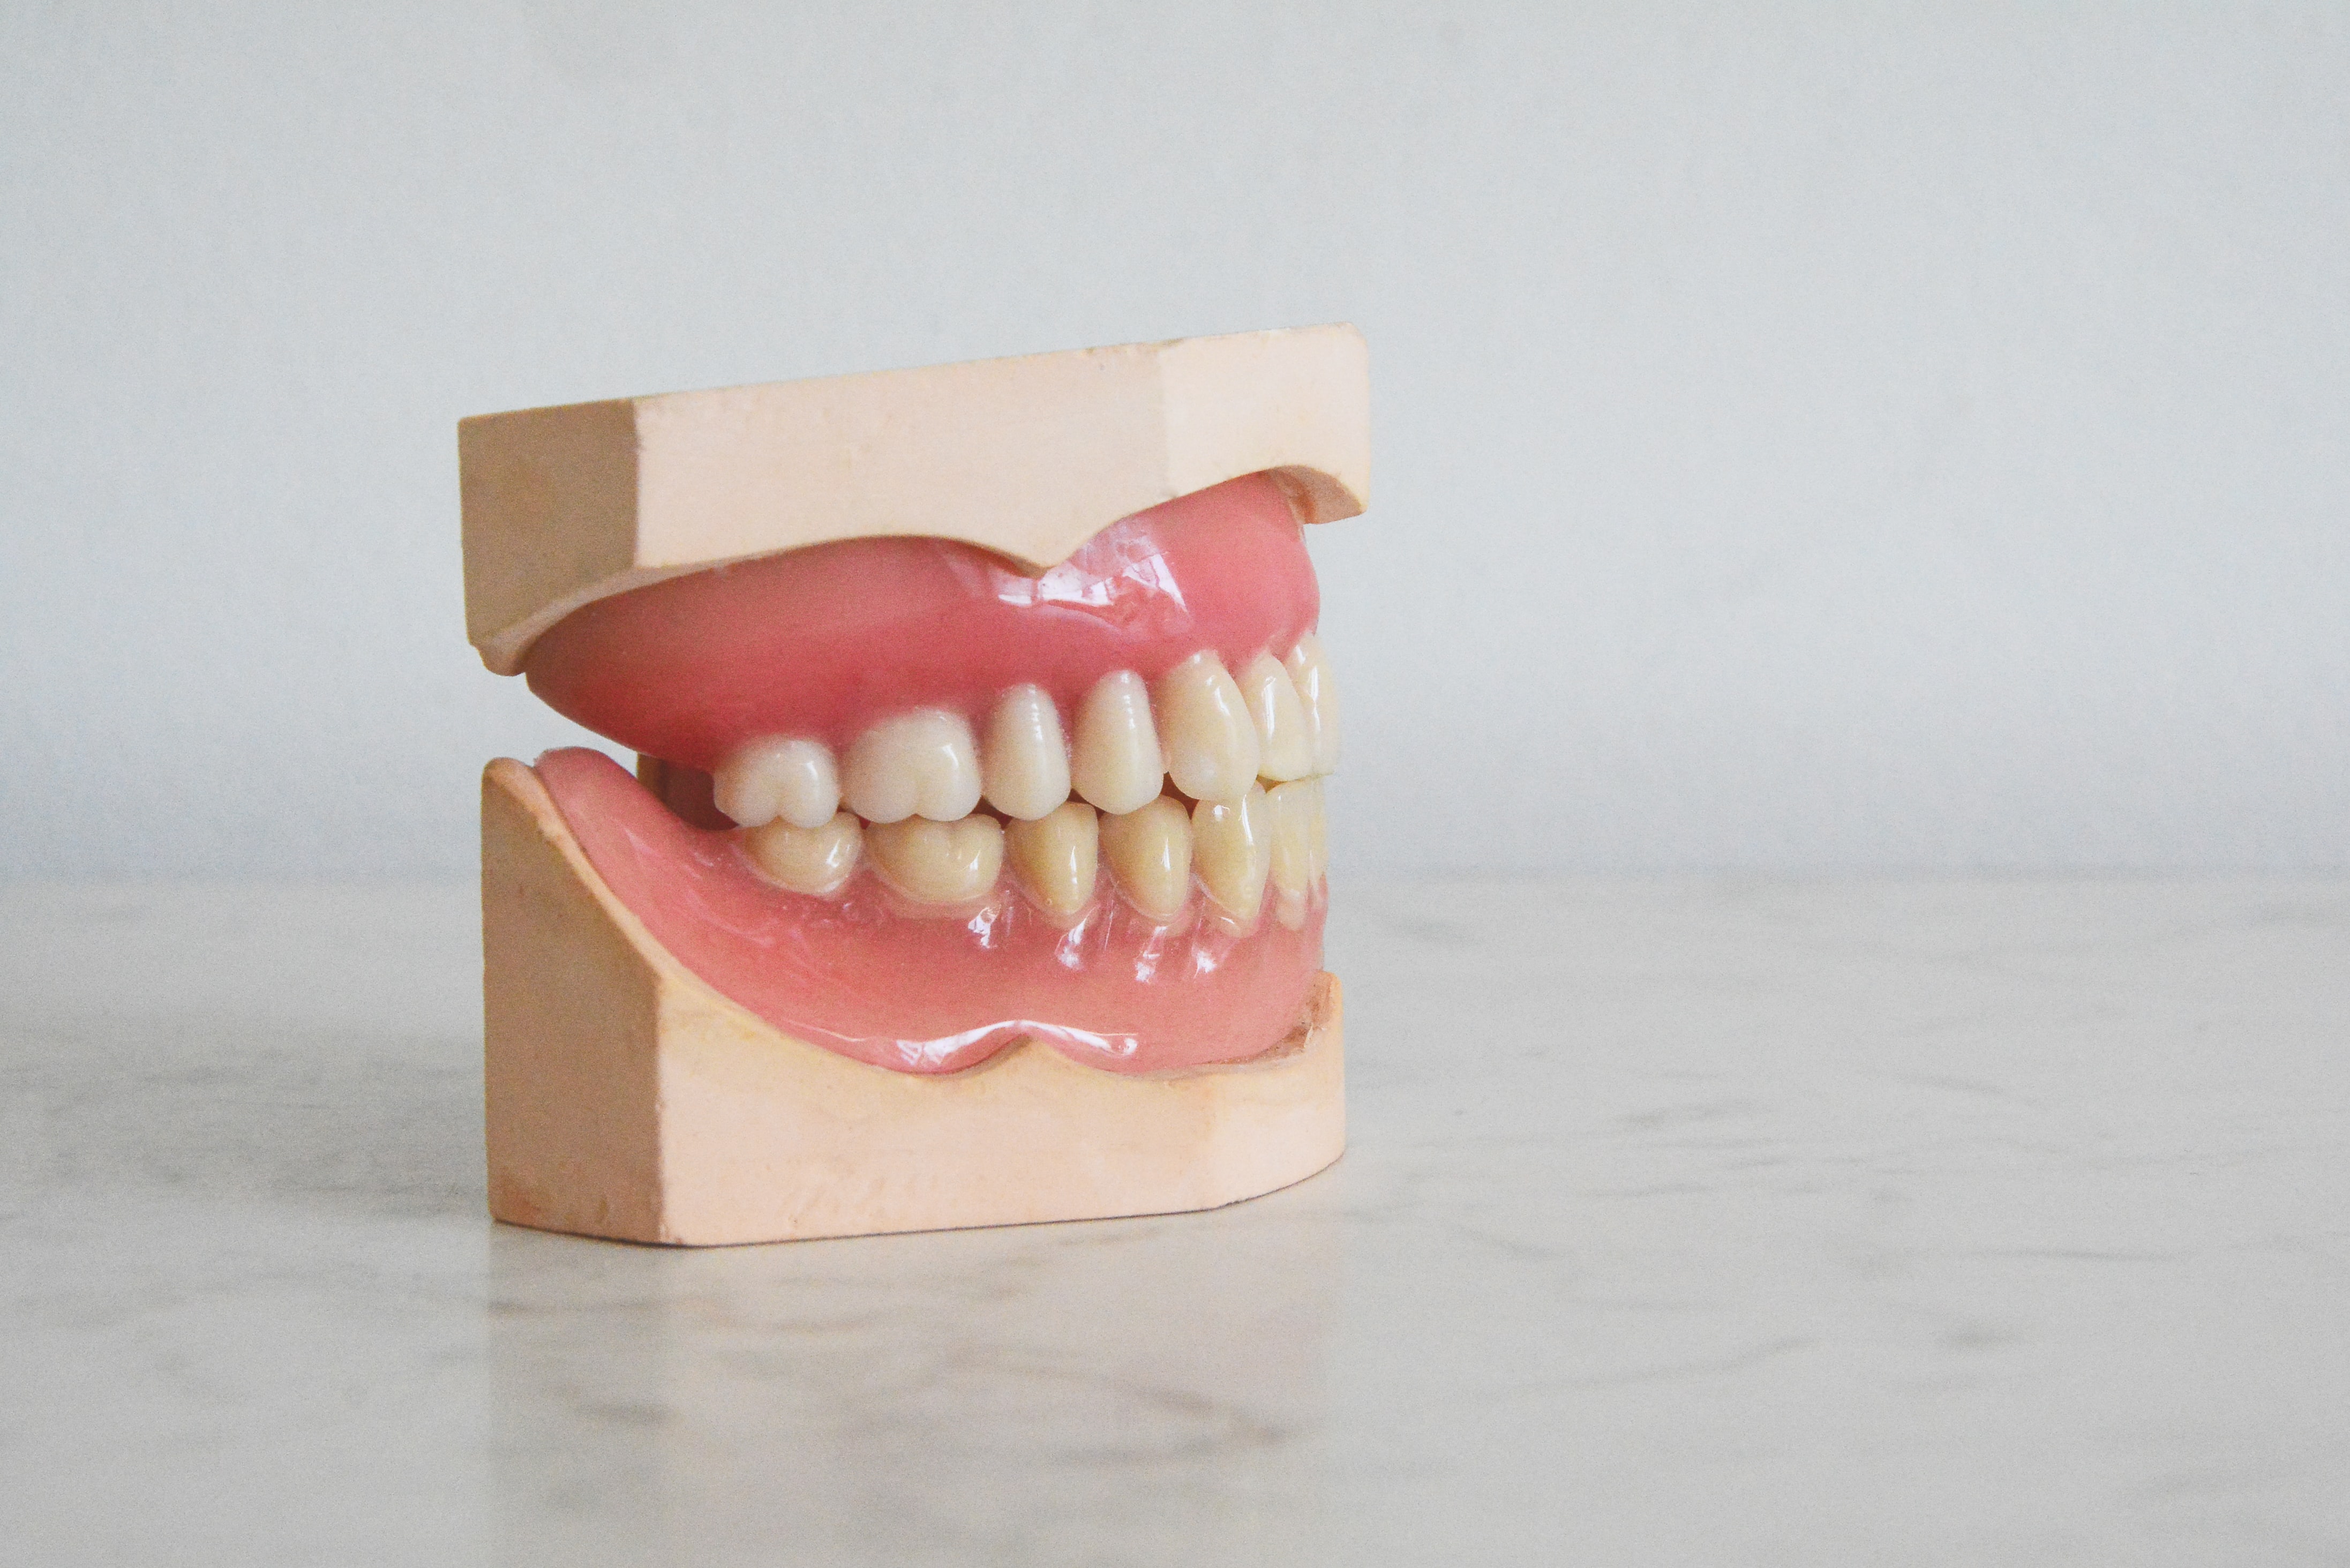 A prop used to show gum disease causes and symptoms